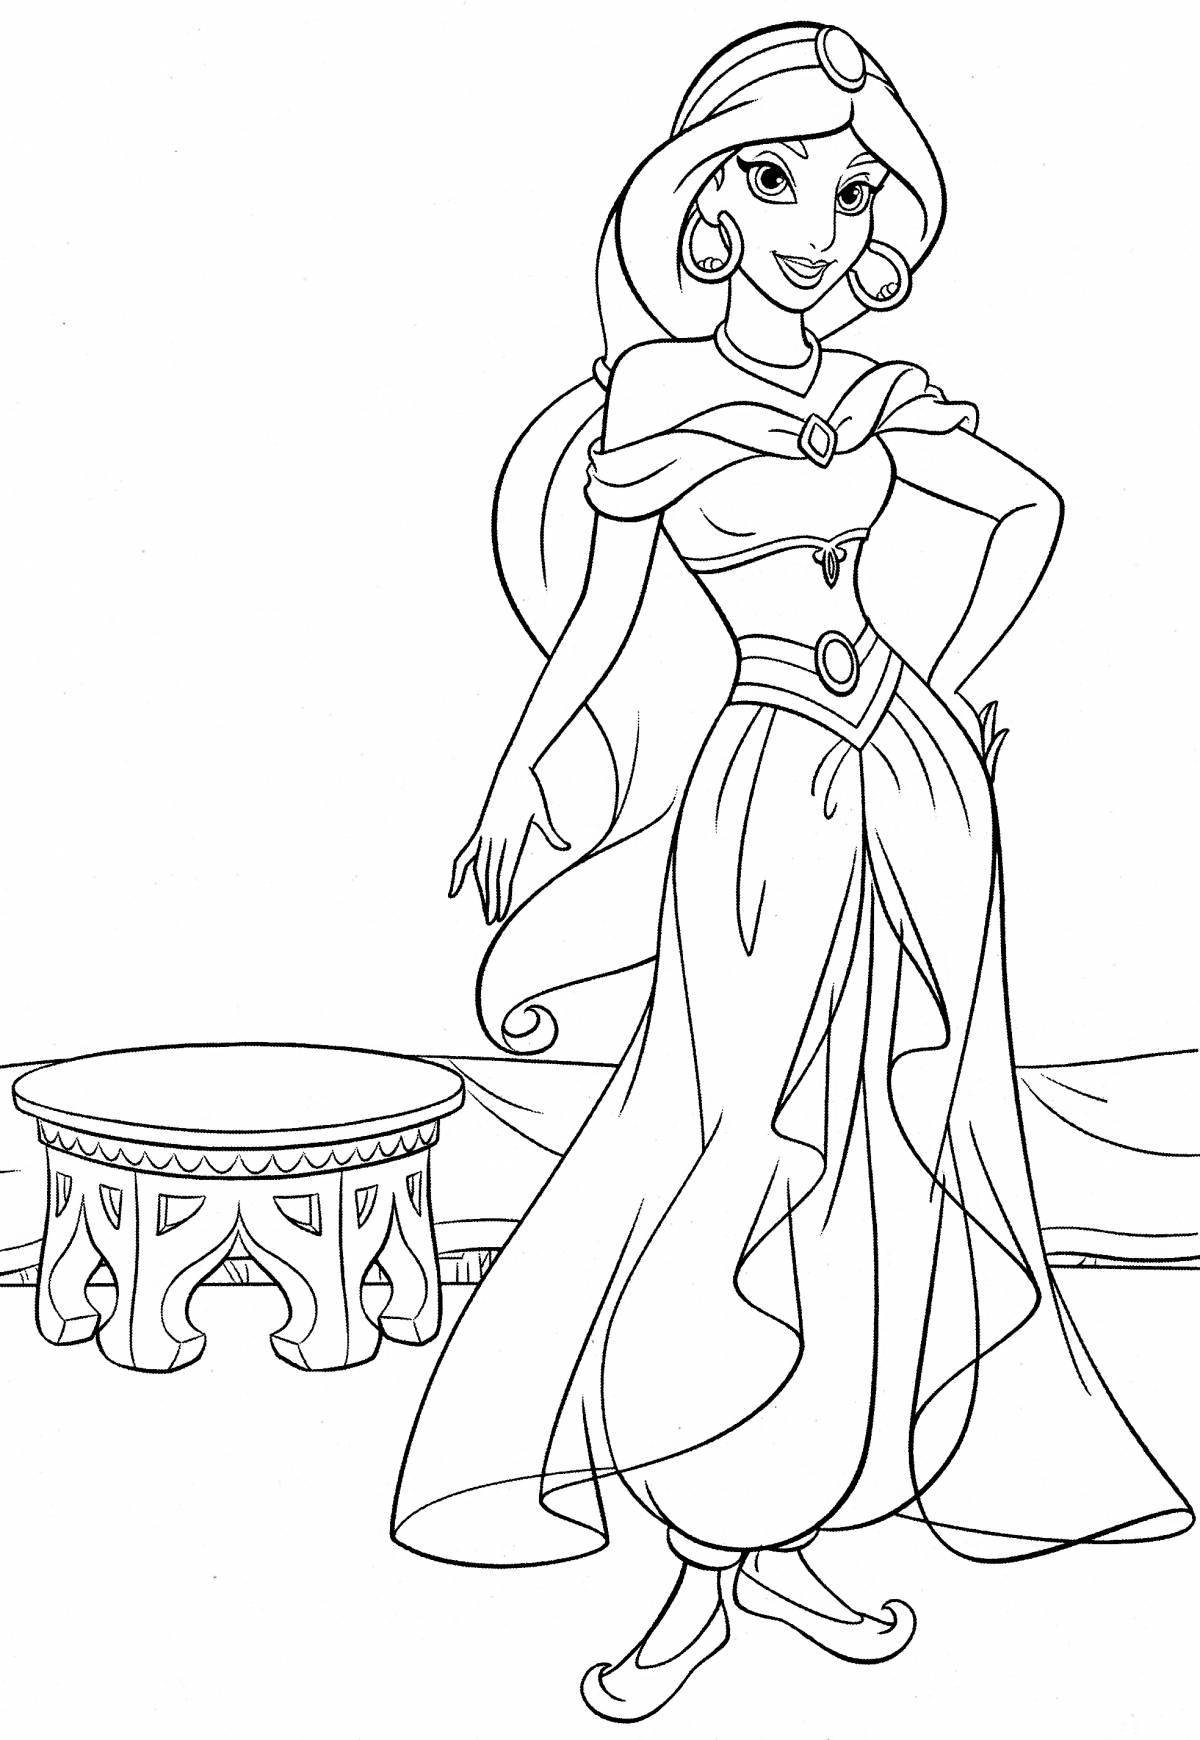 Glowing princess coloring pages